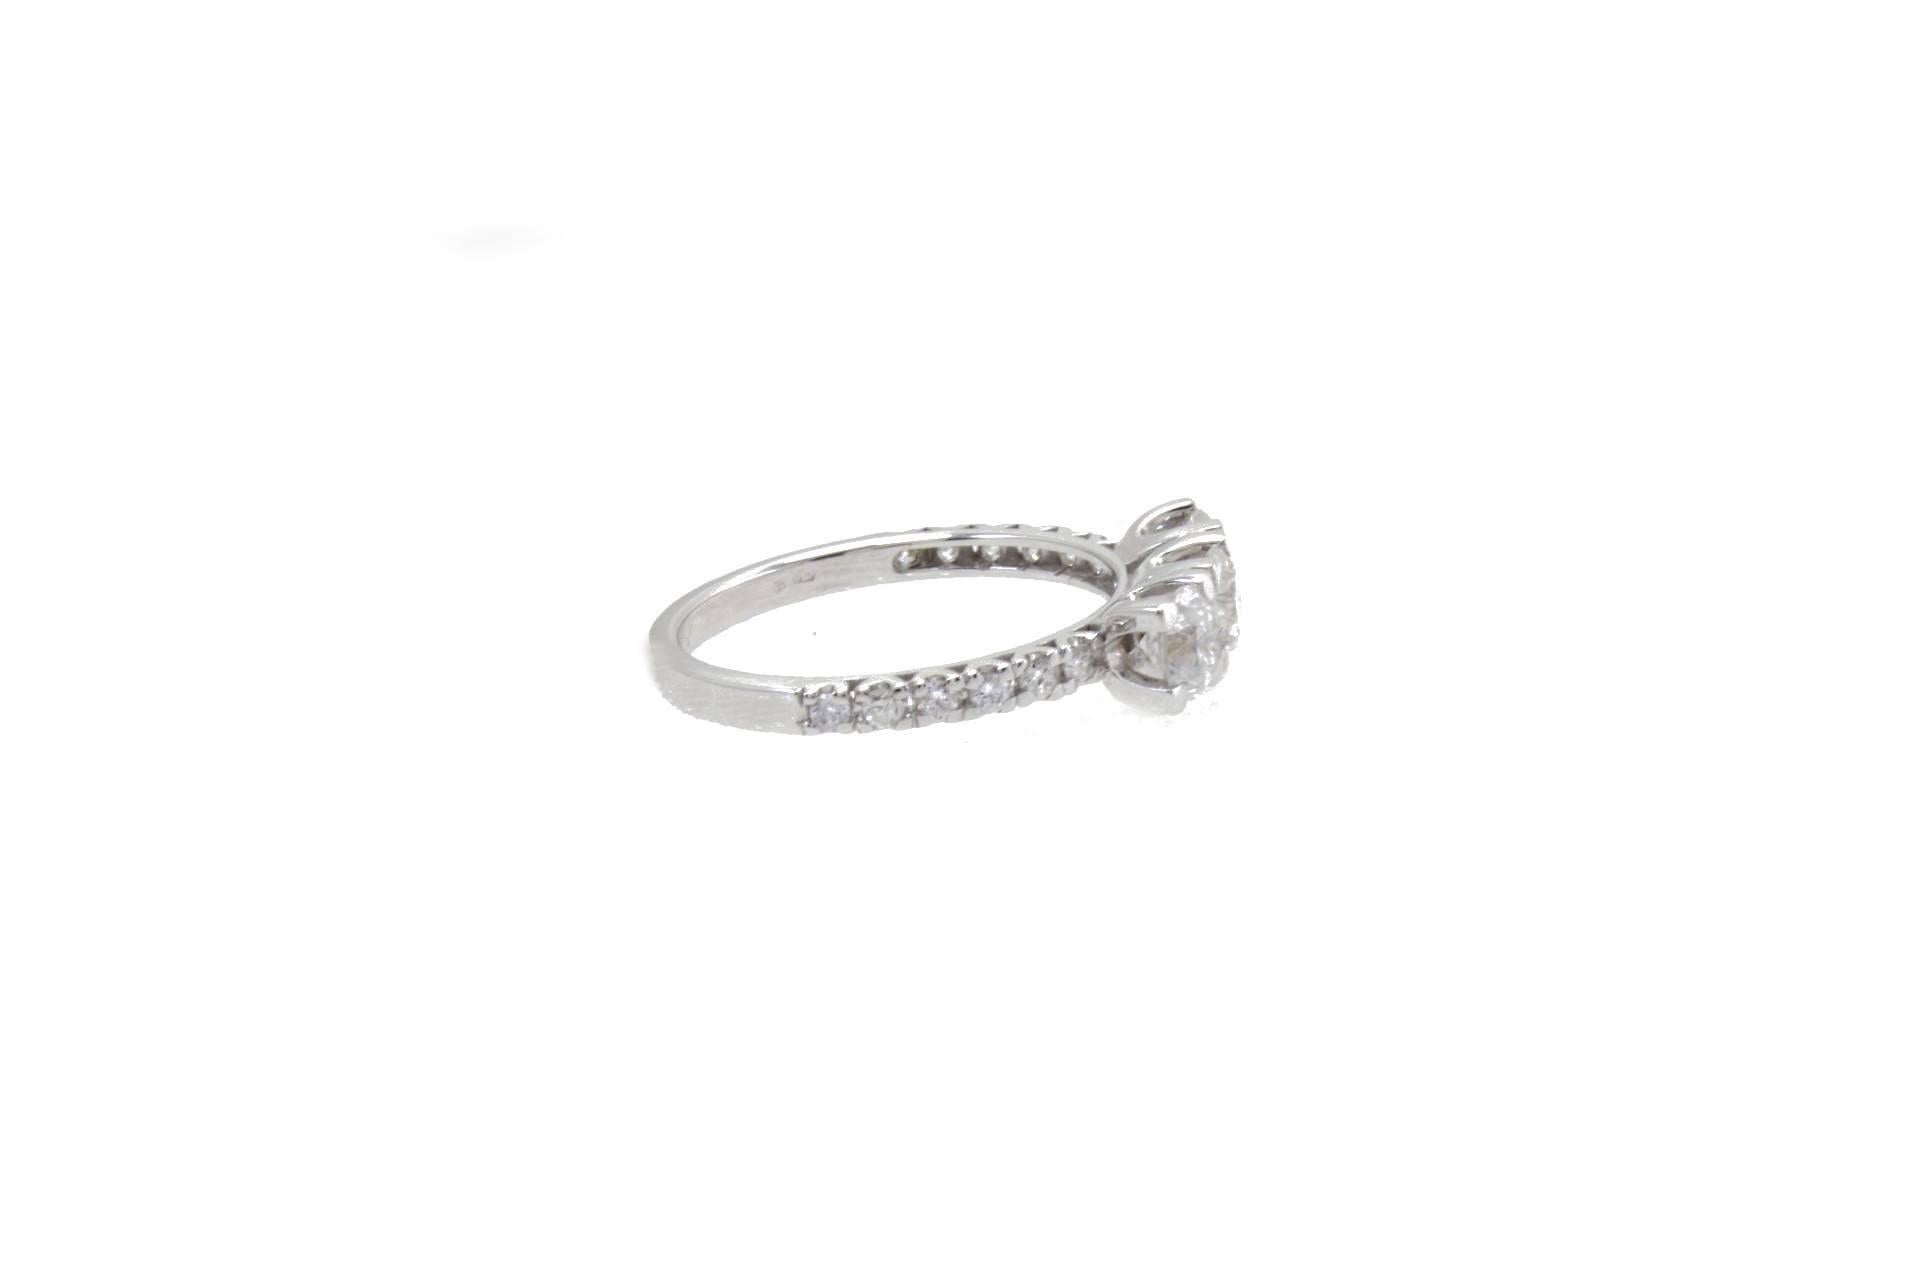 SHIPPING POLICY:
No additional costs will be added to this order.
Shipping costs will be totally covered by the seller (customs duties included).

Shiny ring in 18kt white gold composed of 3 central diamonds and a diamonds row that links